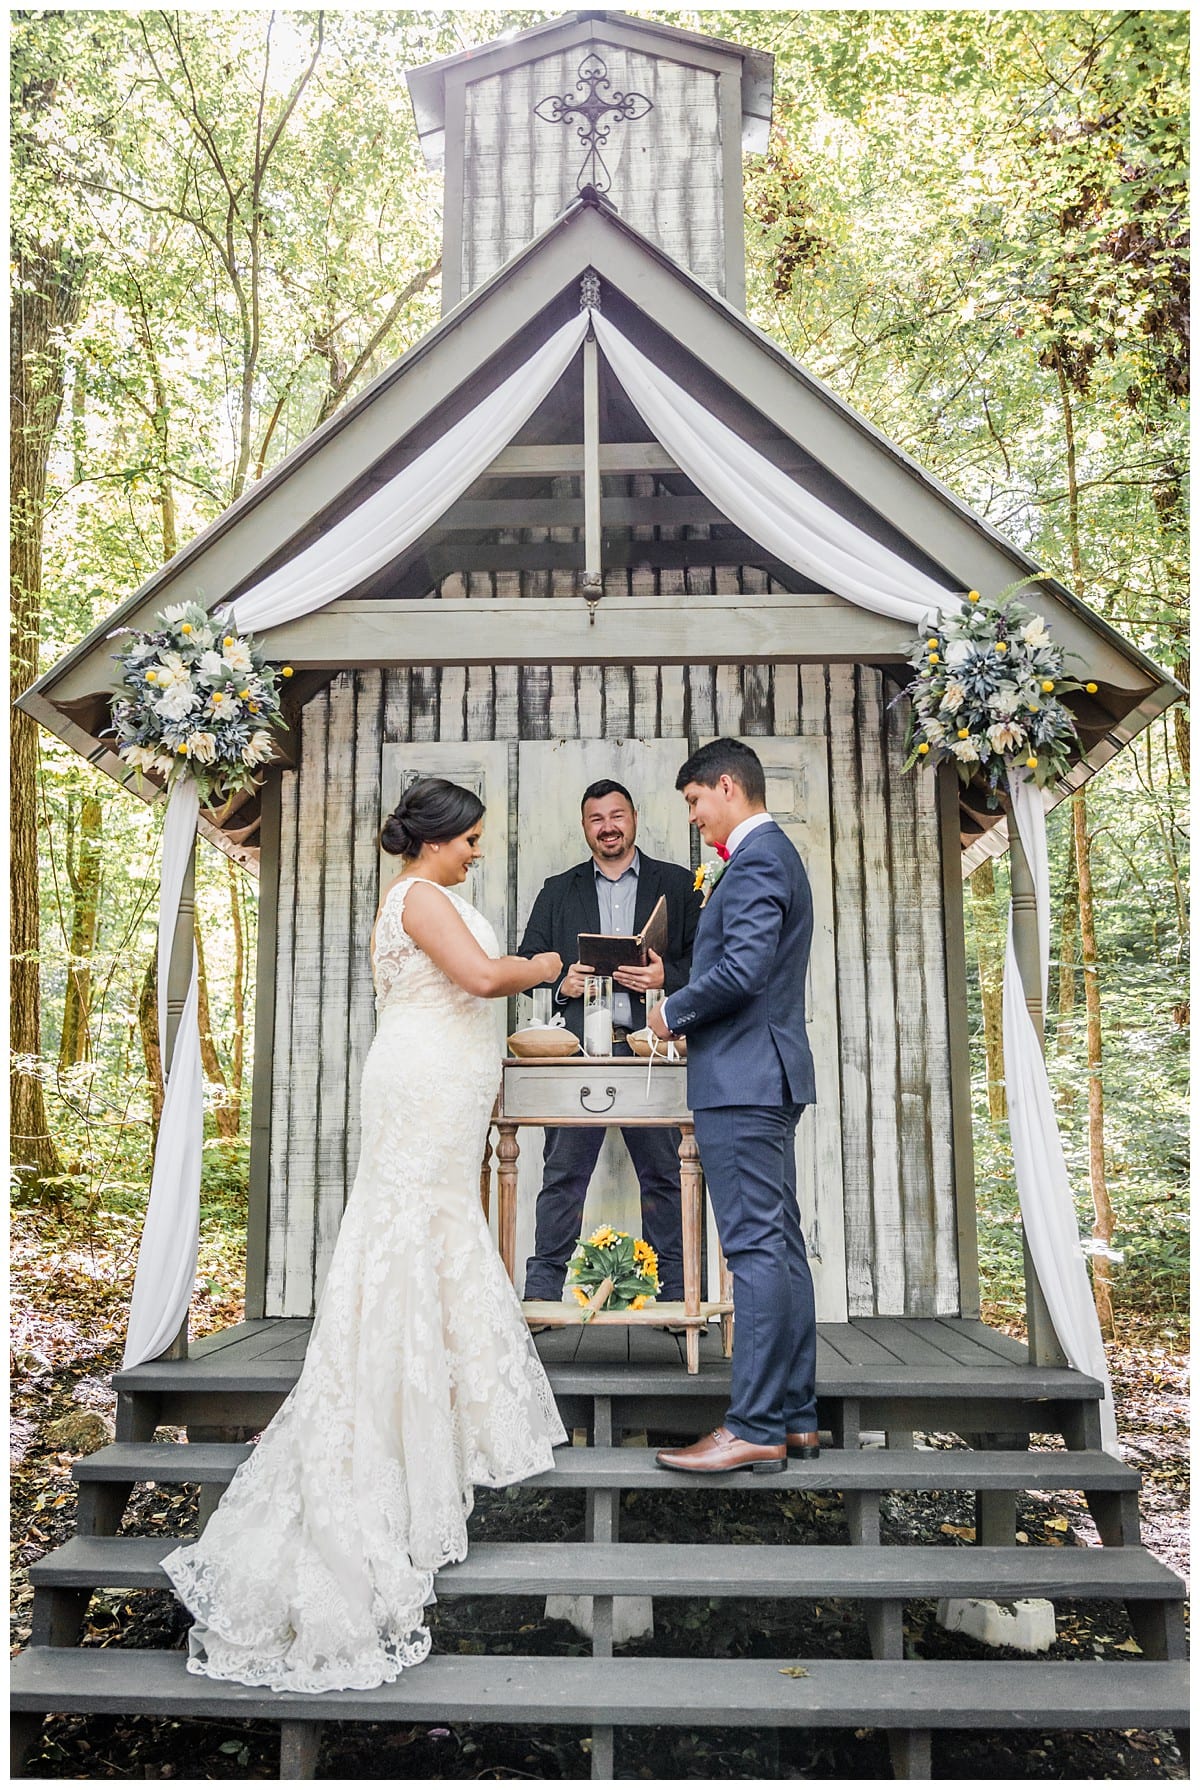 Wedding Chapel in the Forest